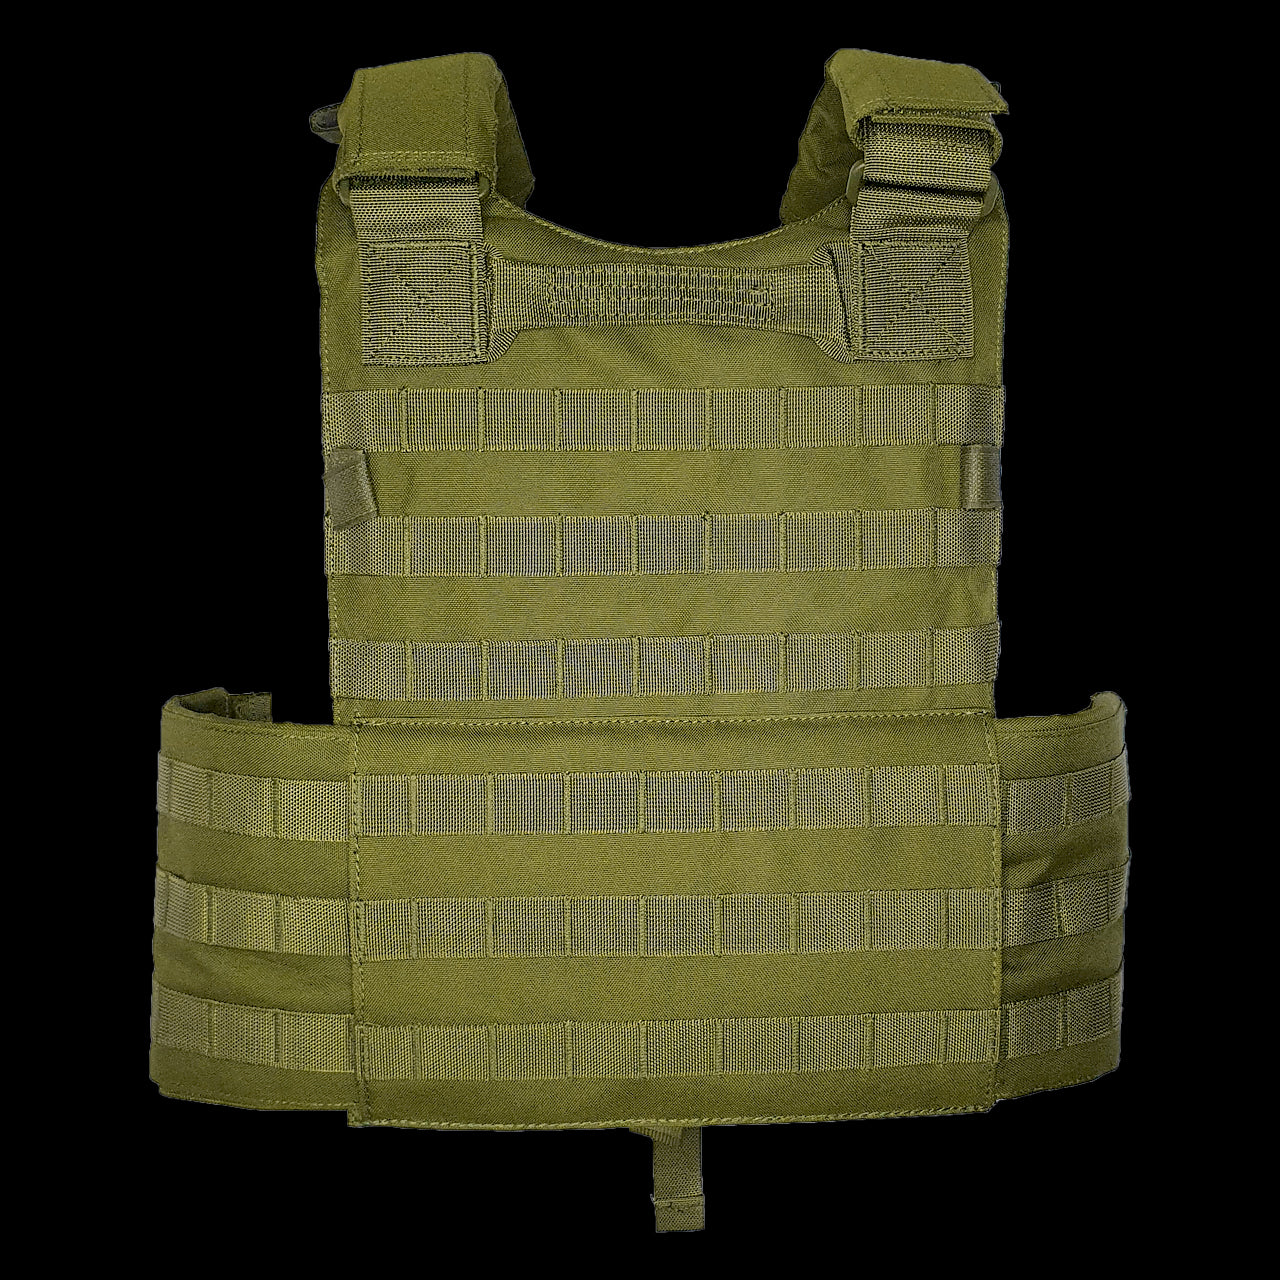 Assaulter Plate Carrier - FORTITUDE WORKS SINGAPORE